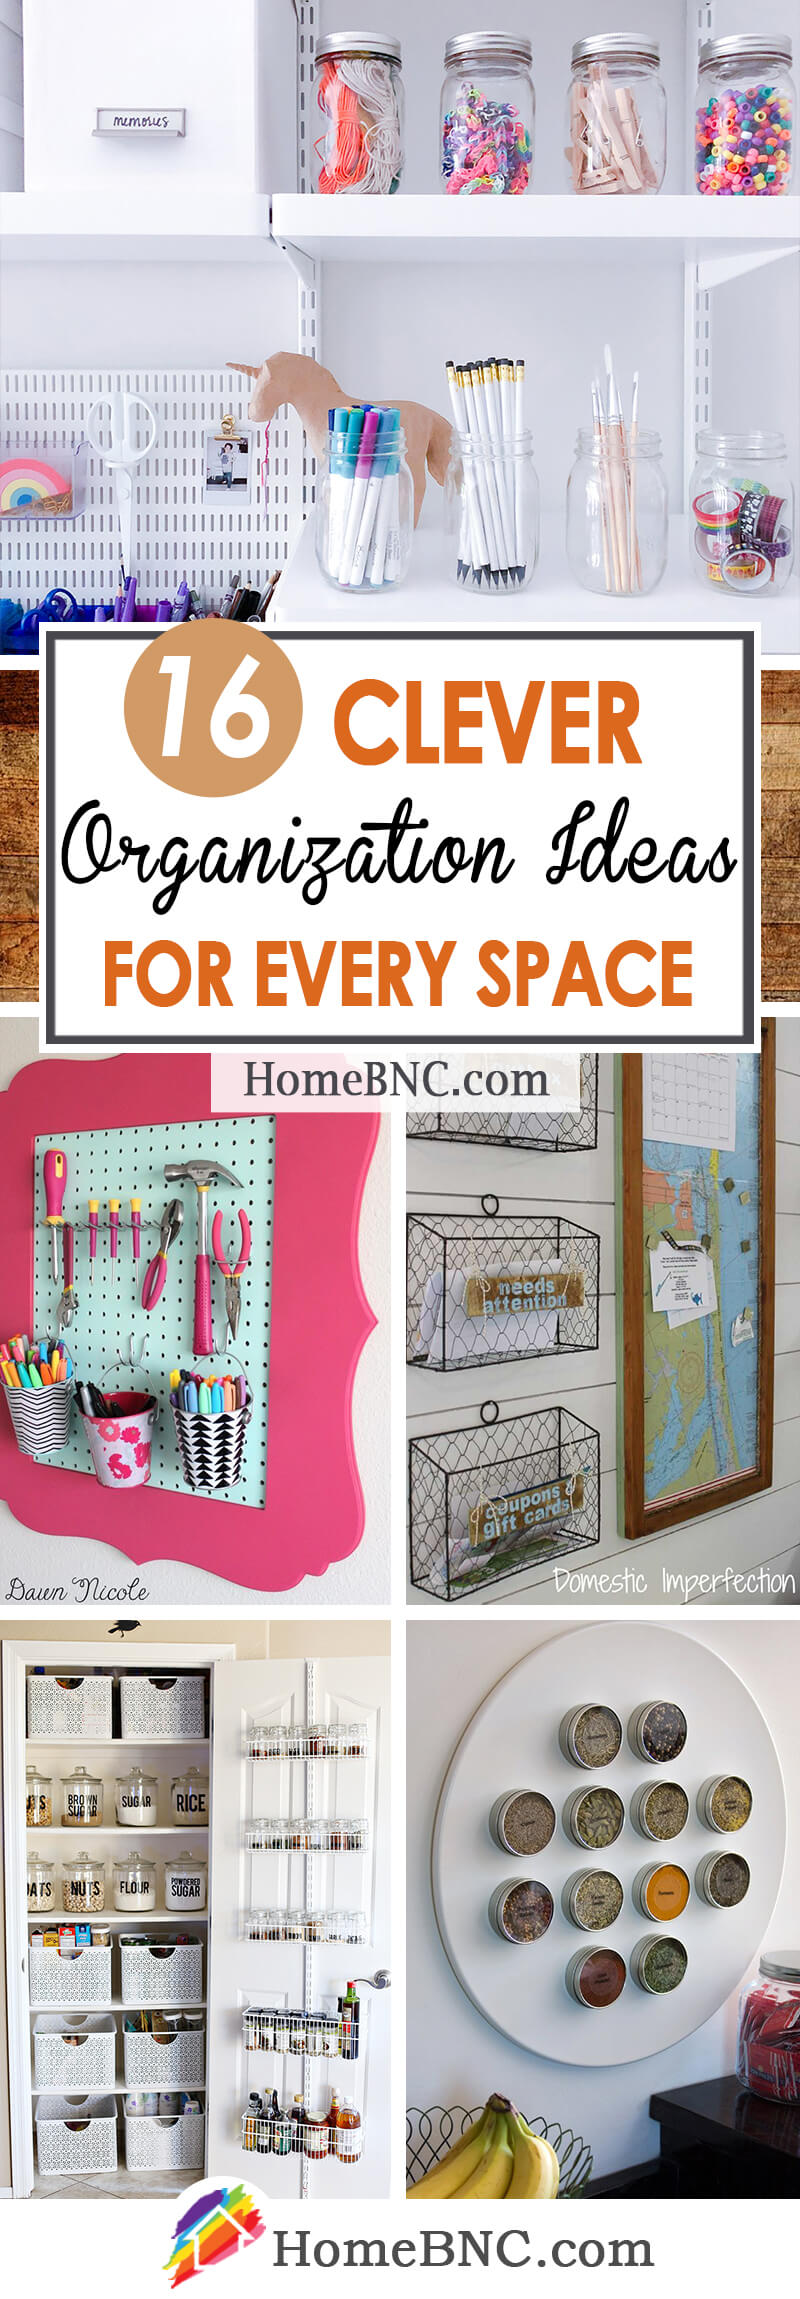 Organization Ideas for Every Space